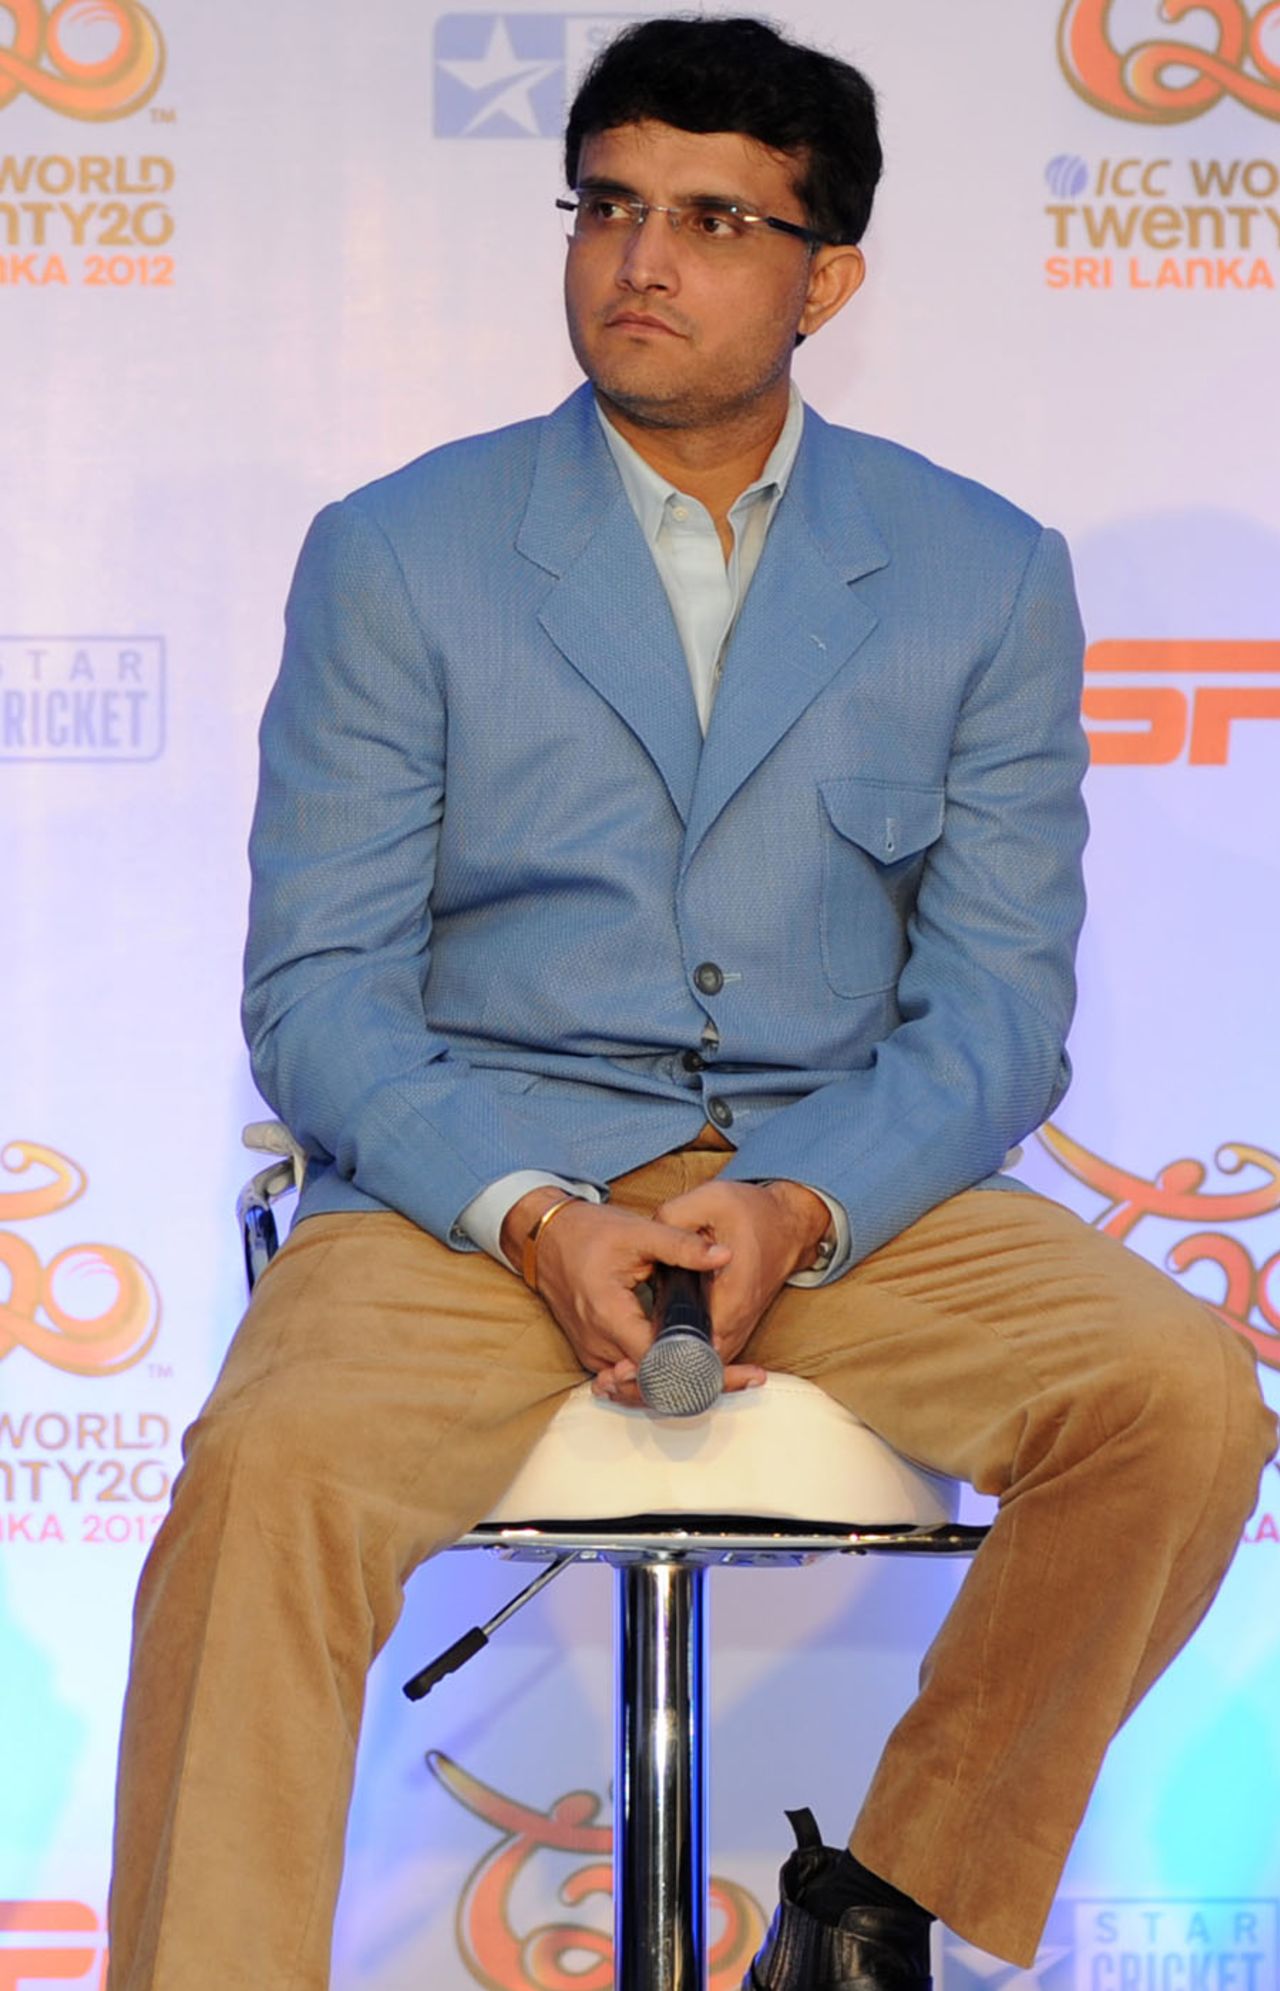 Sourav Ganguly at a press conference on the ICC World T20, New Delhi, August 28, 2012